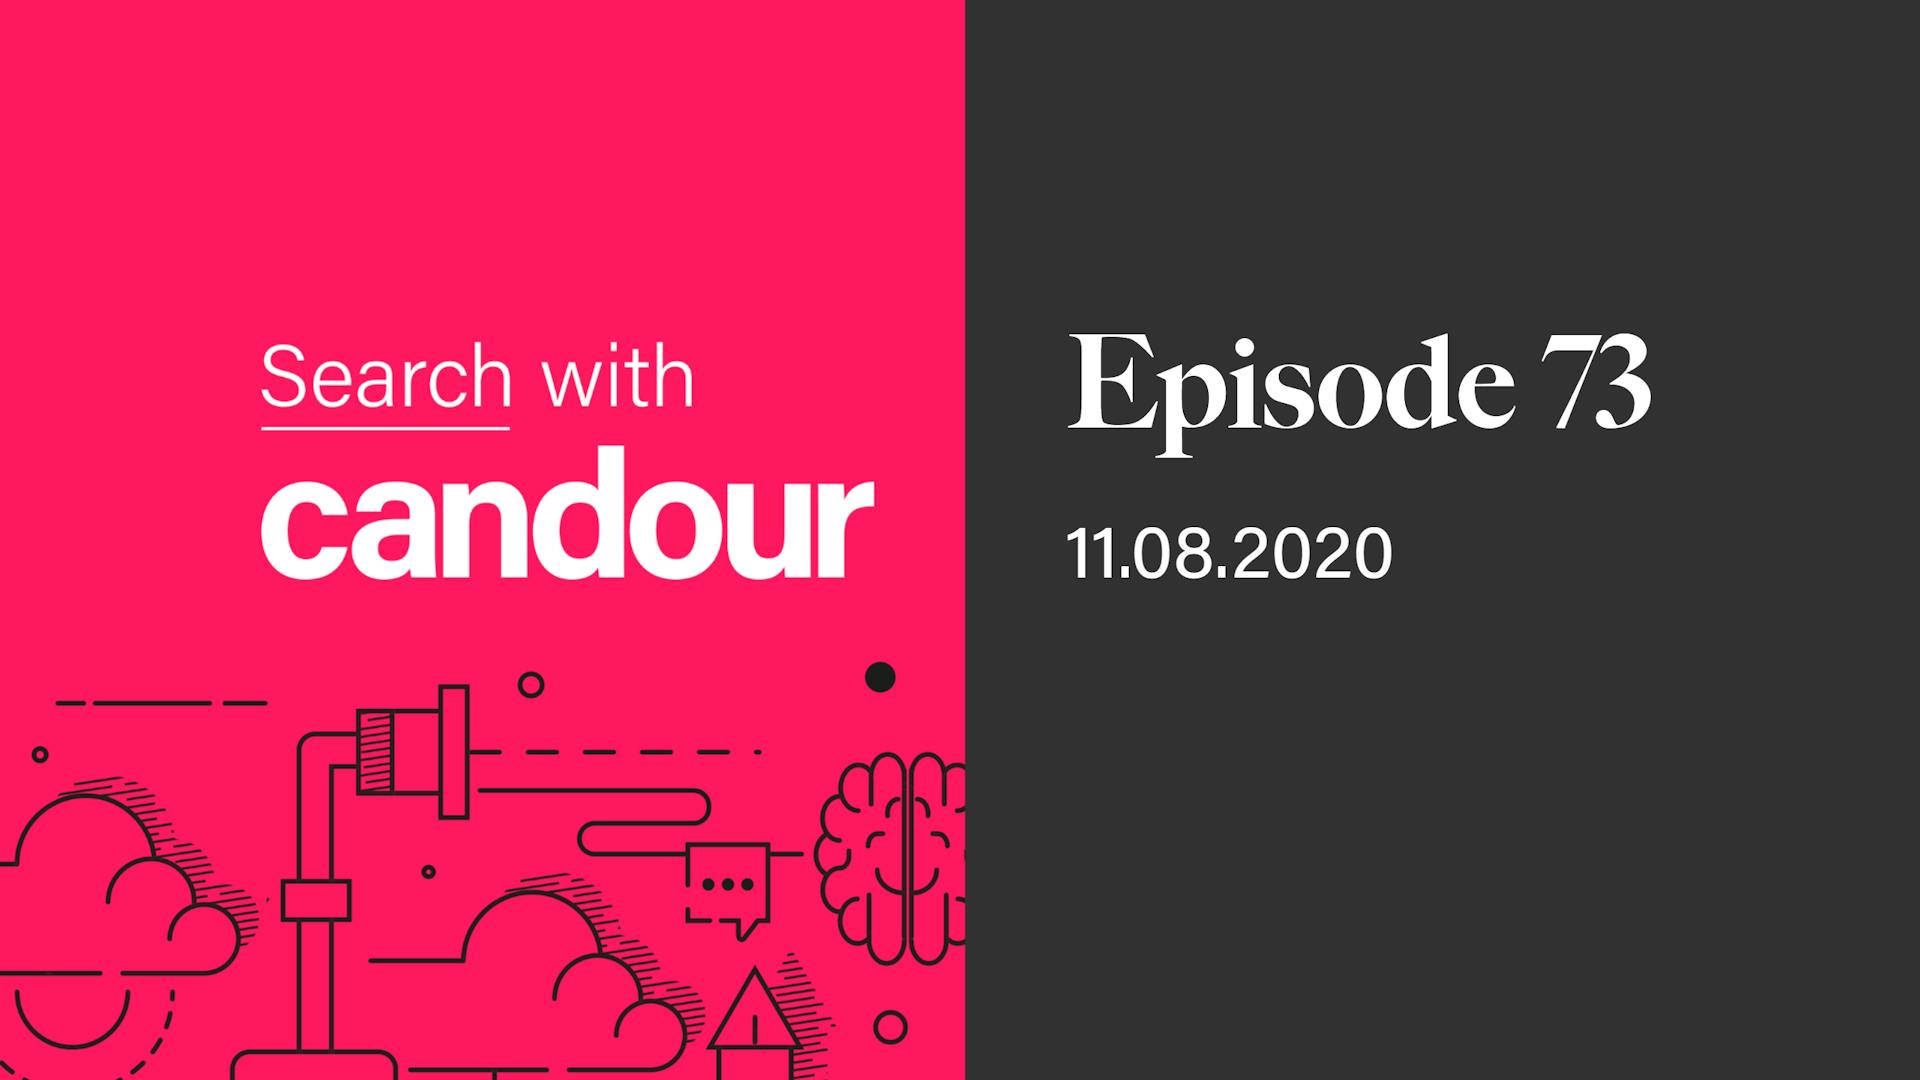 Episode 73 - Search with Candour